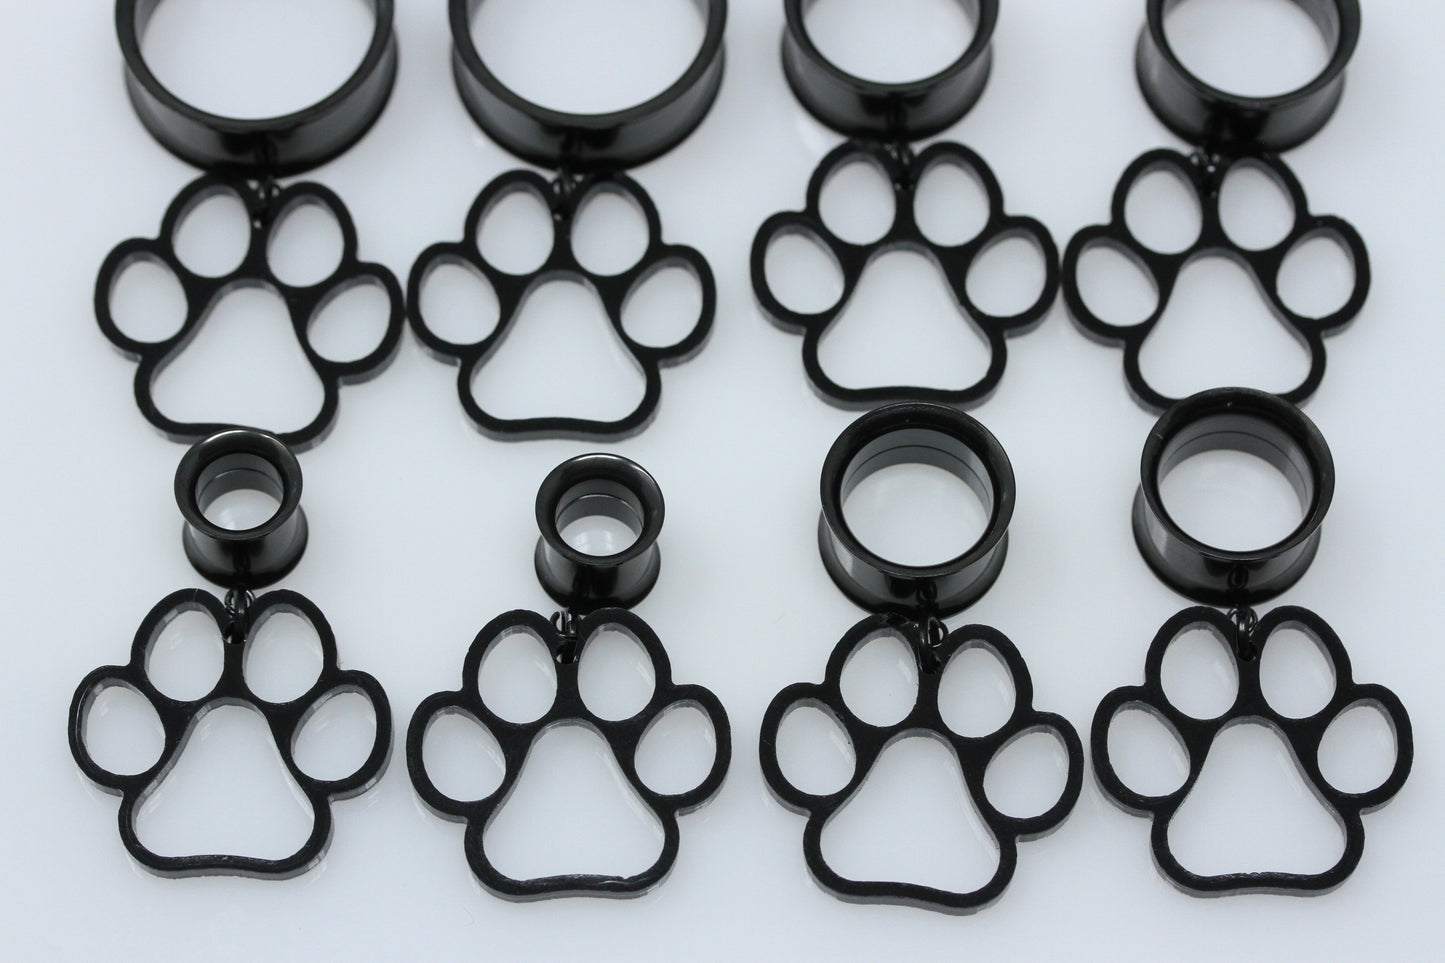 Giving Paws Stainless Steel Danglers - Screw on Tunnel (Pair) - TF033